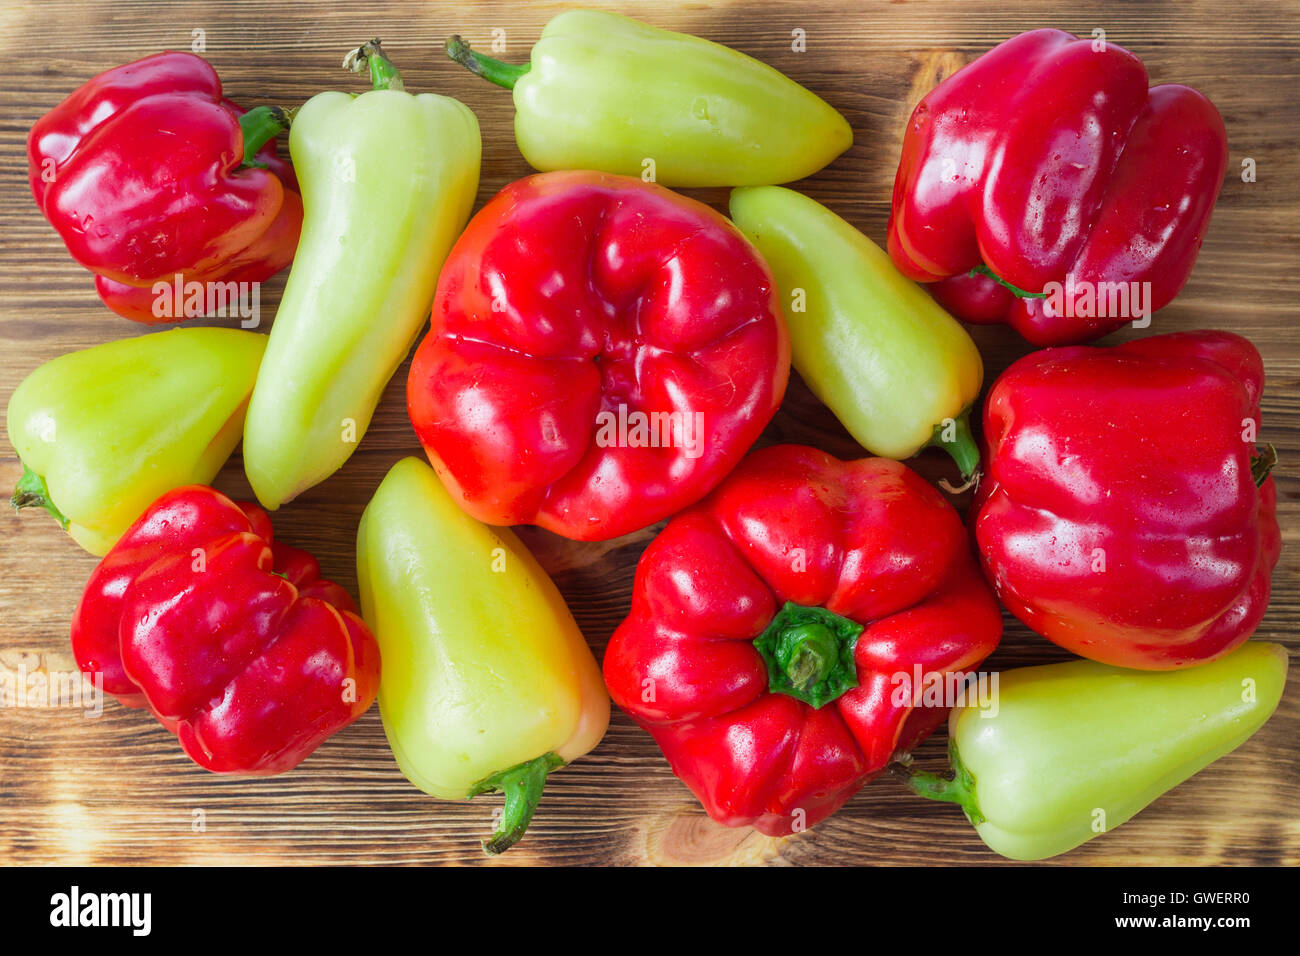 Vegetable still life of mature red and green peppers on wooden background Stock Photo